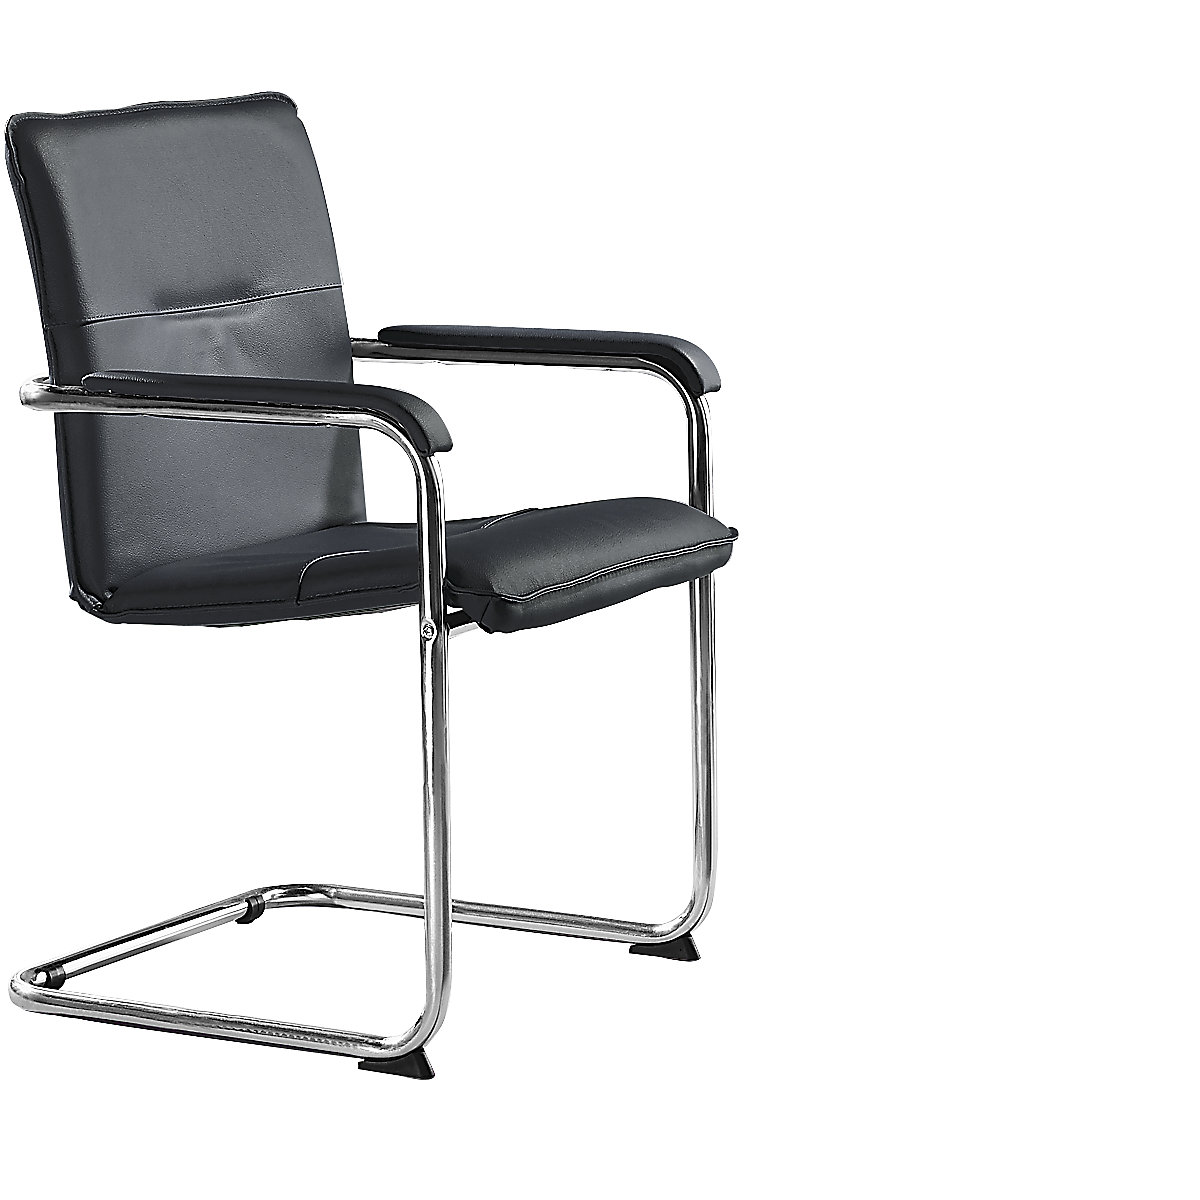 Cantilever chair with genuine leather covering